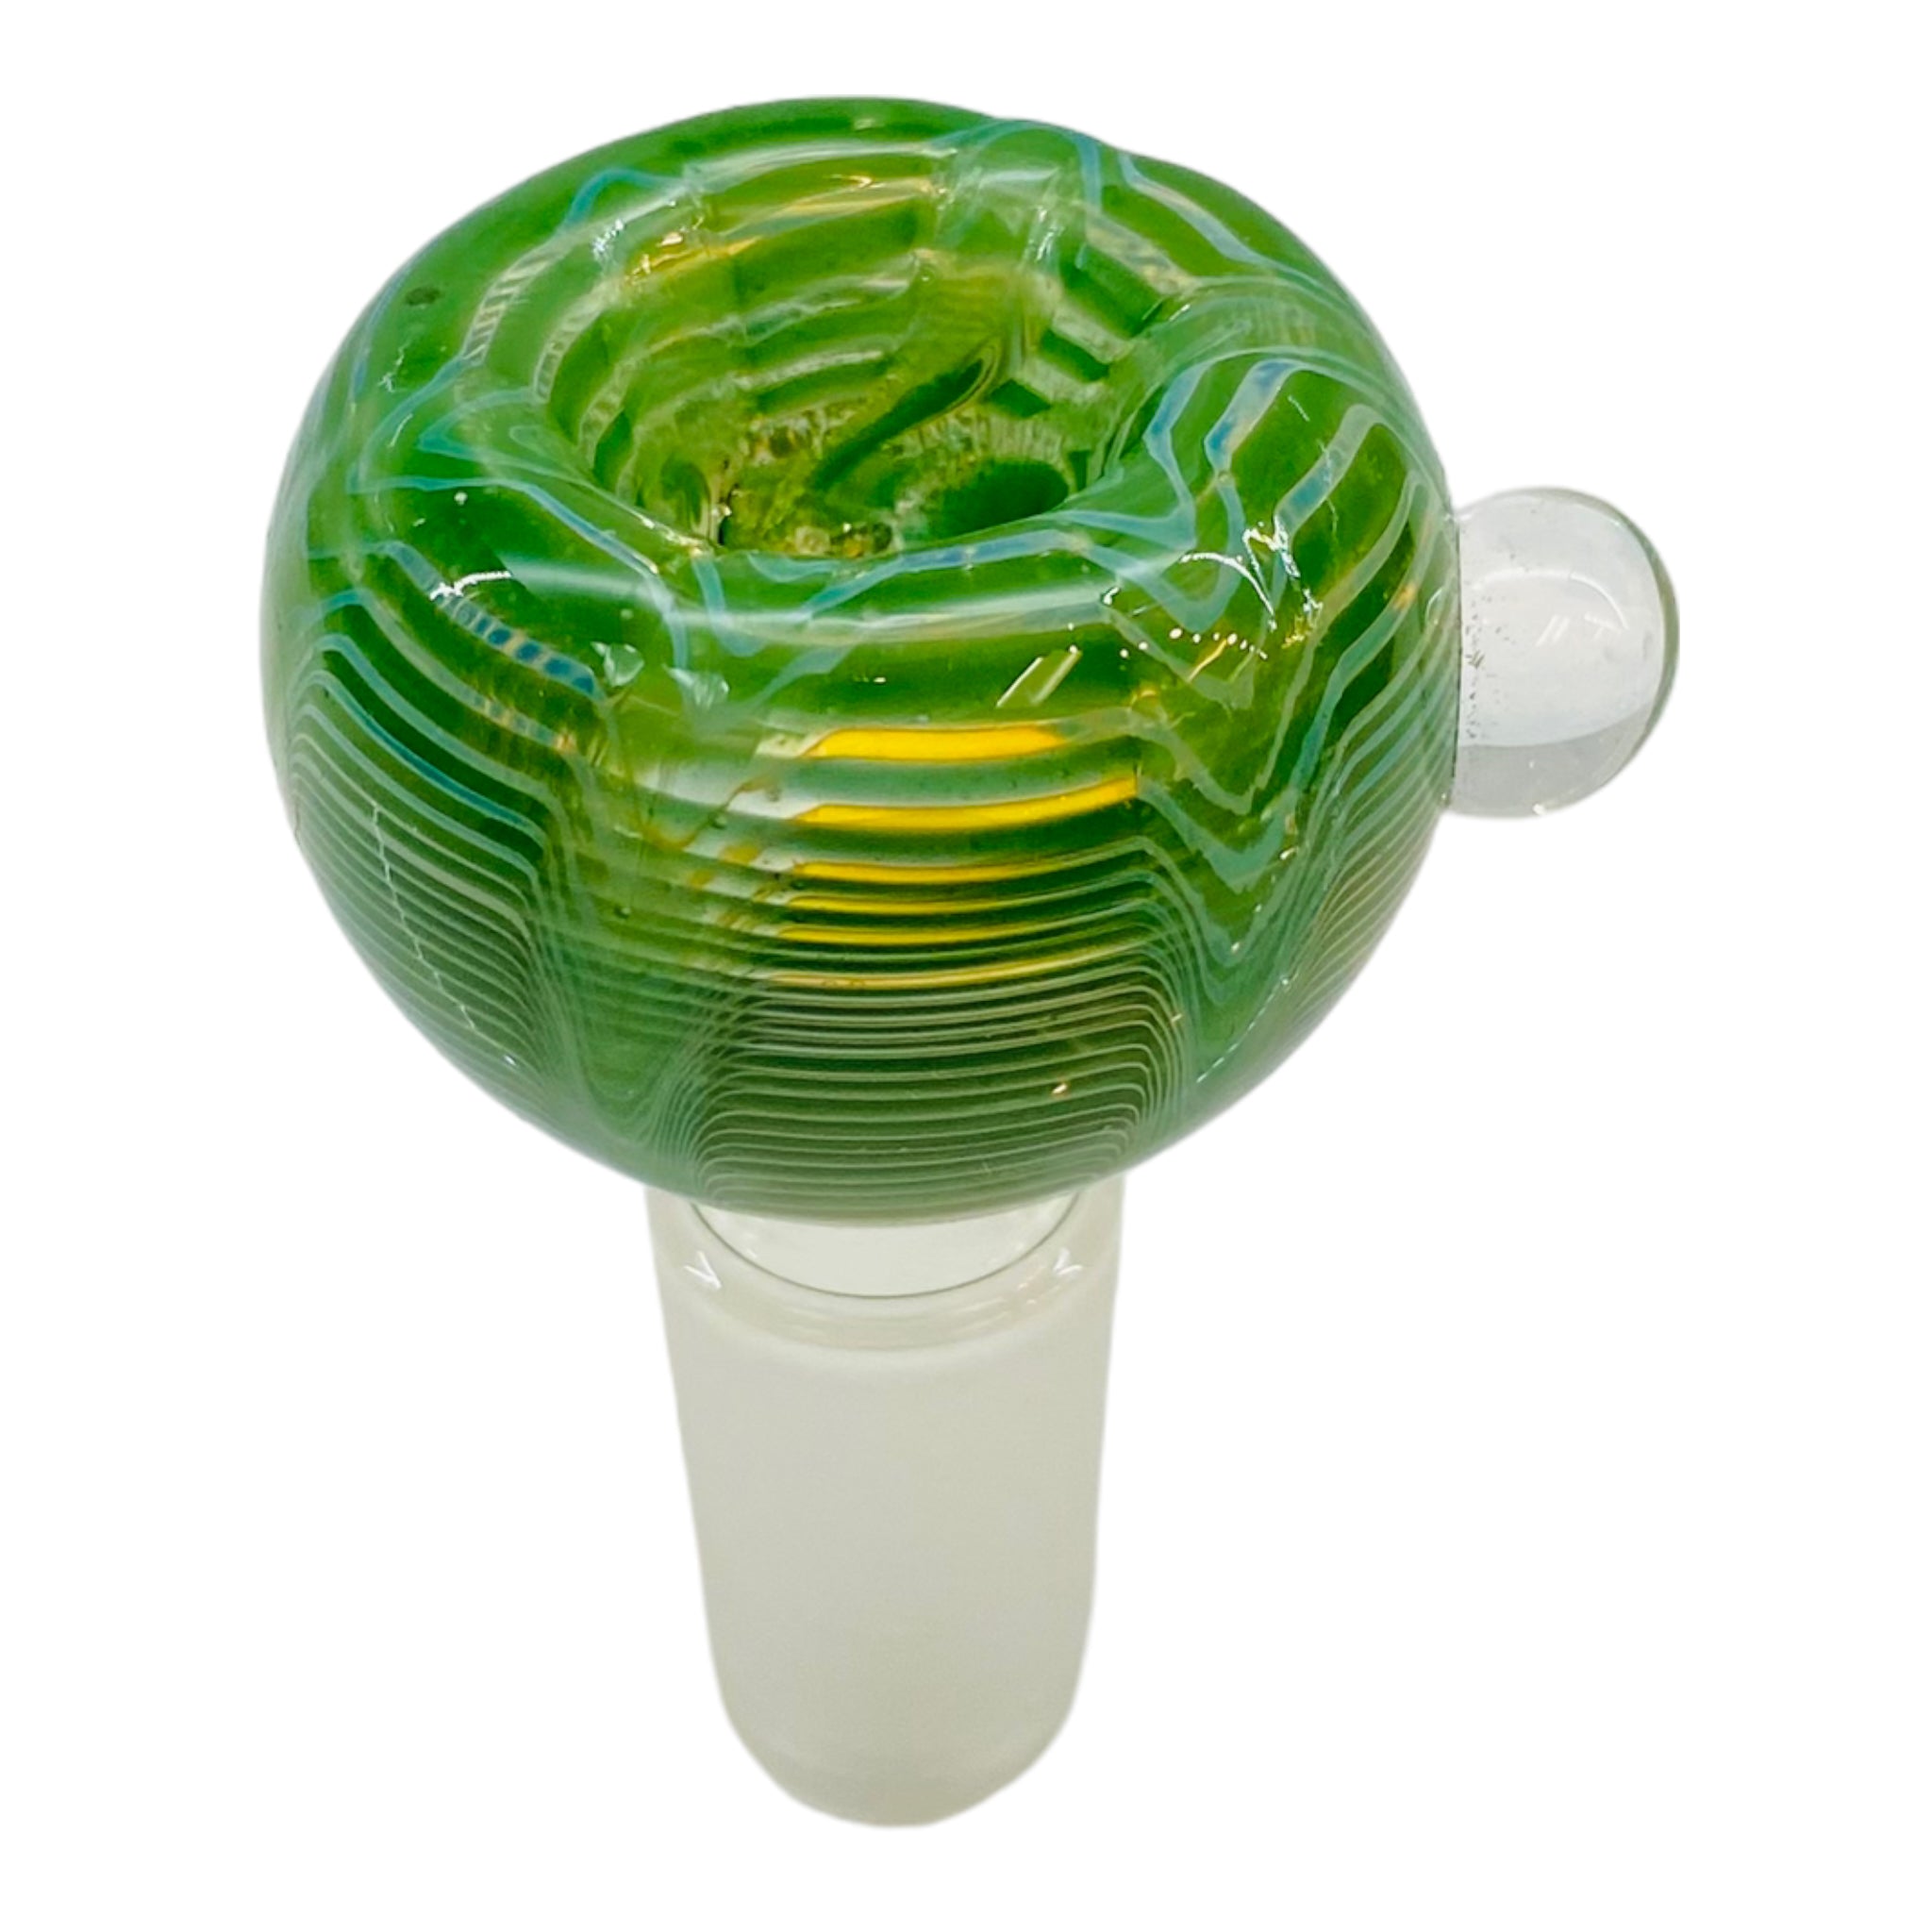 14mm Flower Bowl - Basic Bubble Bong Bowl Piece With Wrap And Rake Twirl - Green